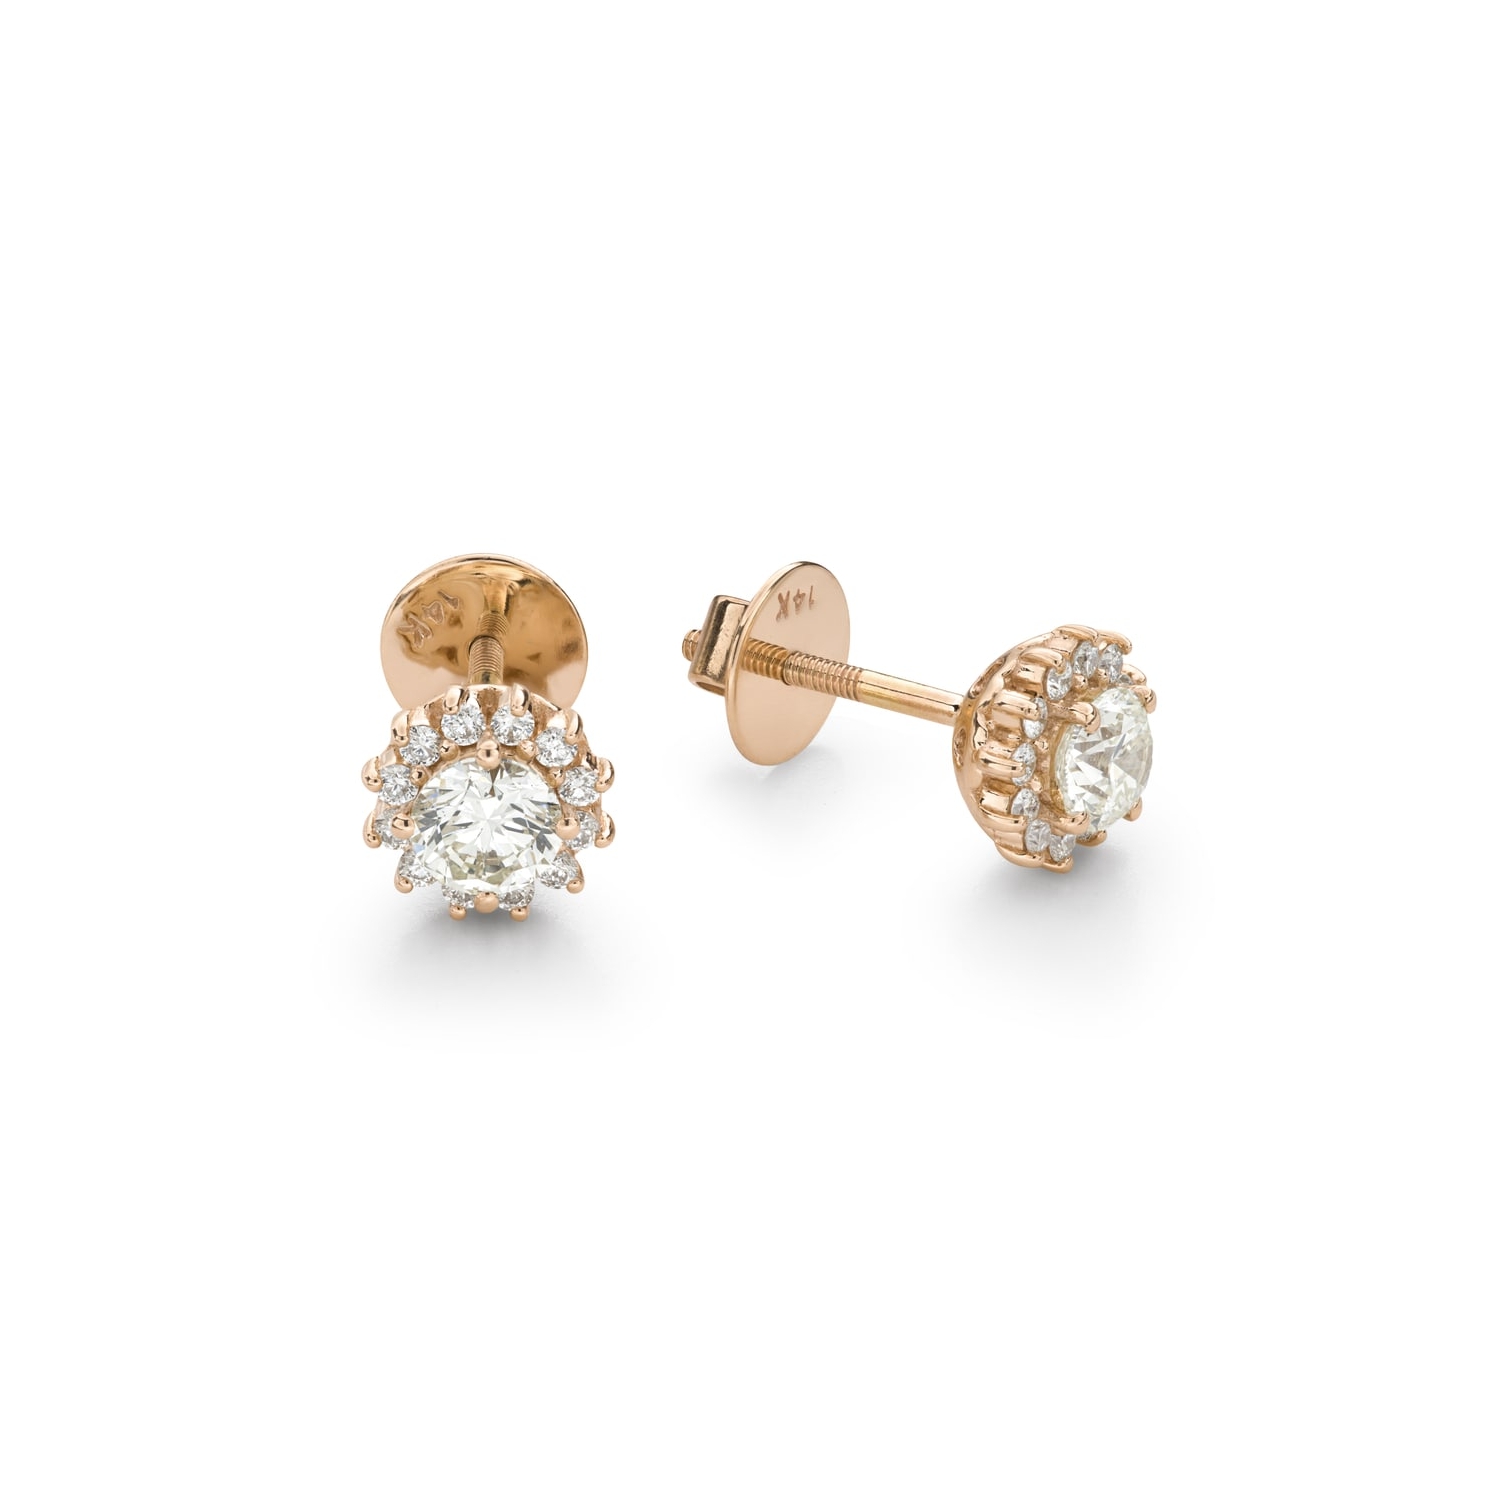 Gold earrings with brilliants "Elegance 43"